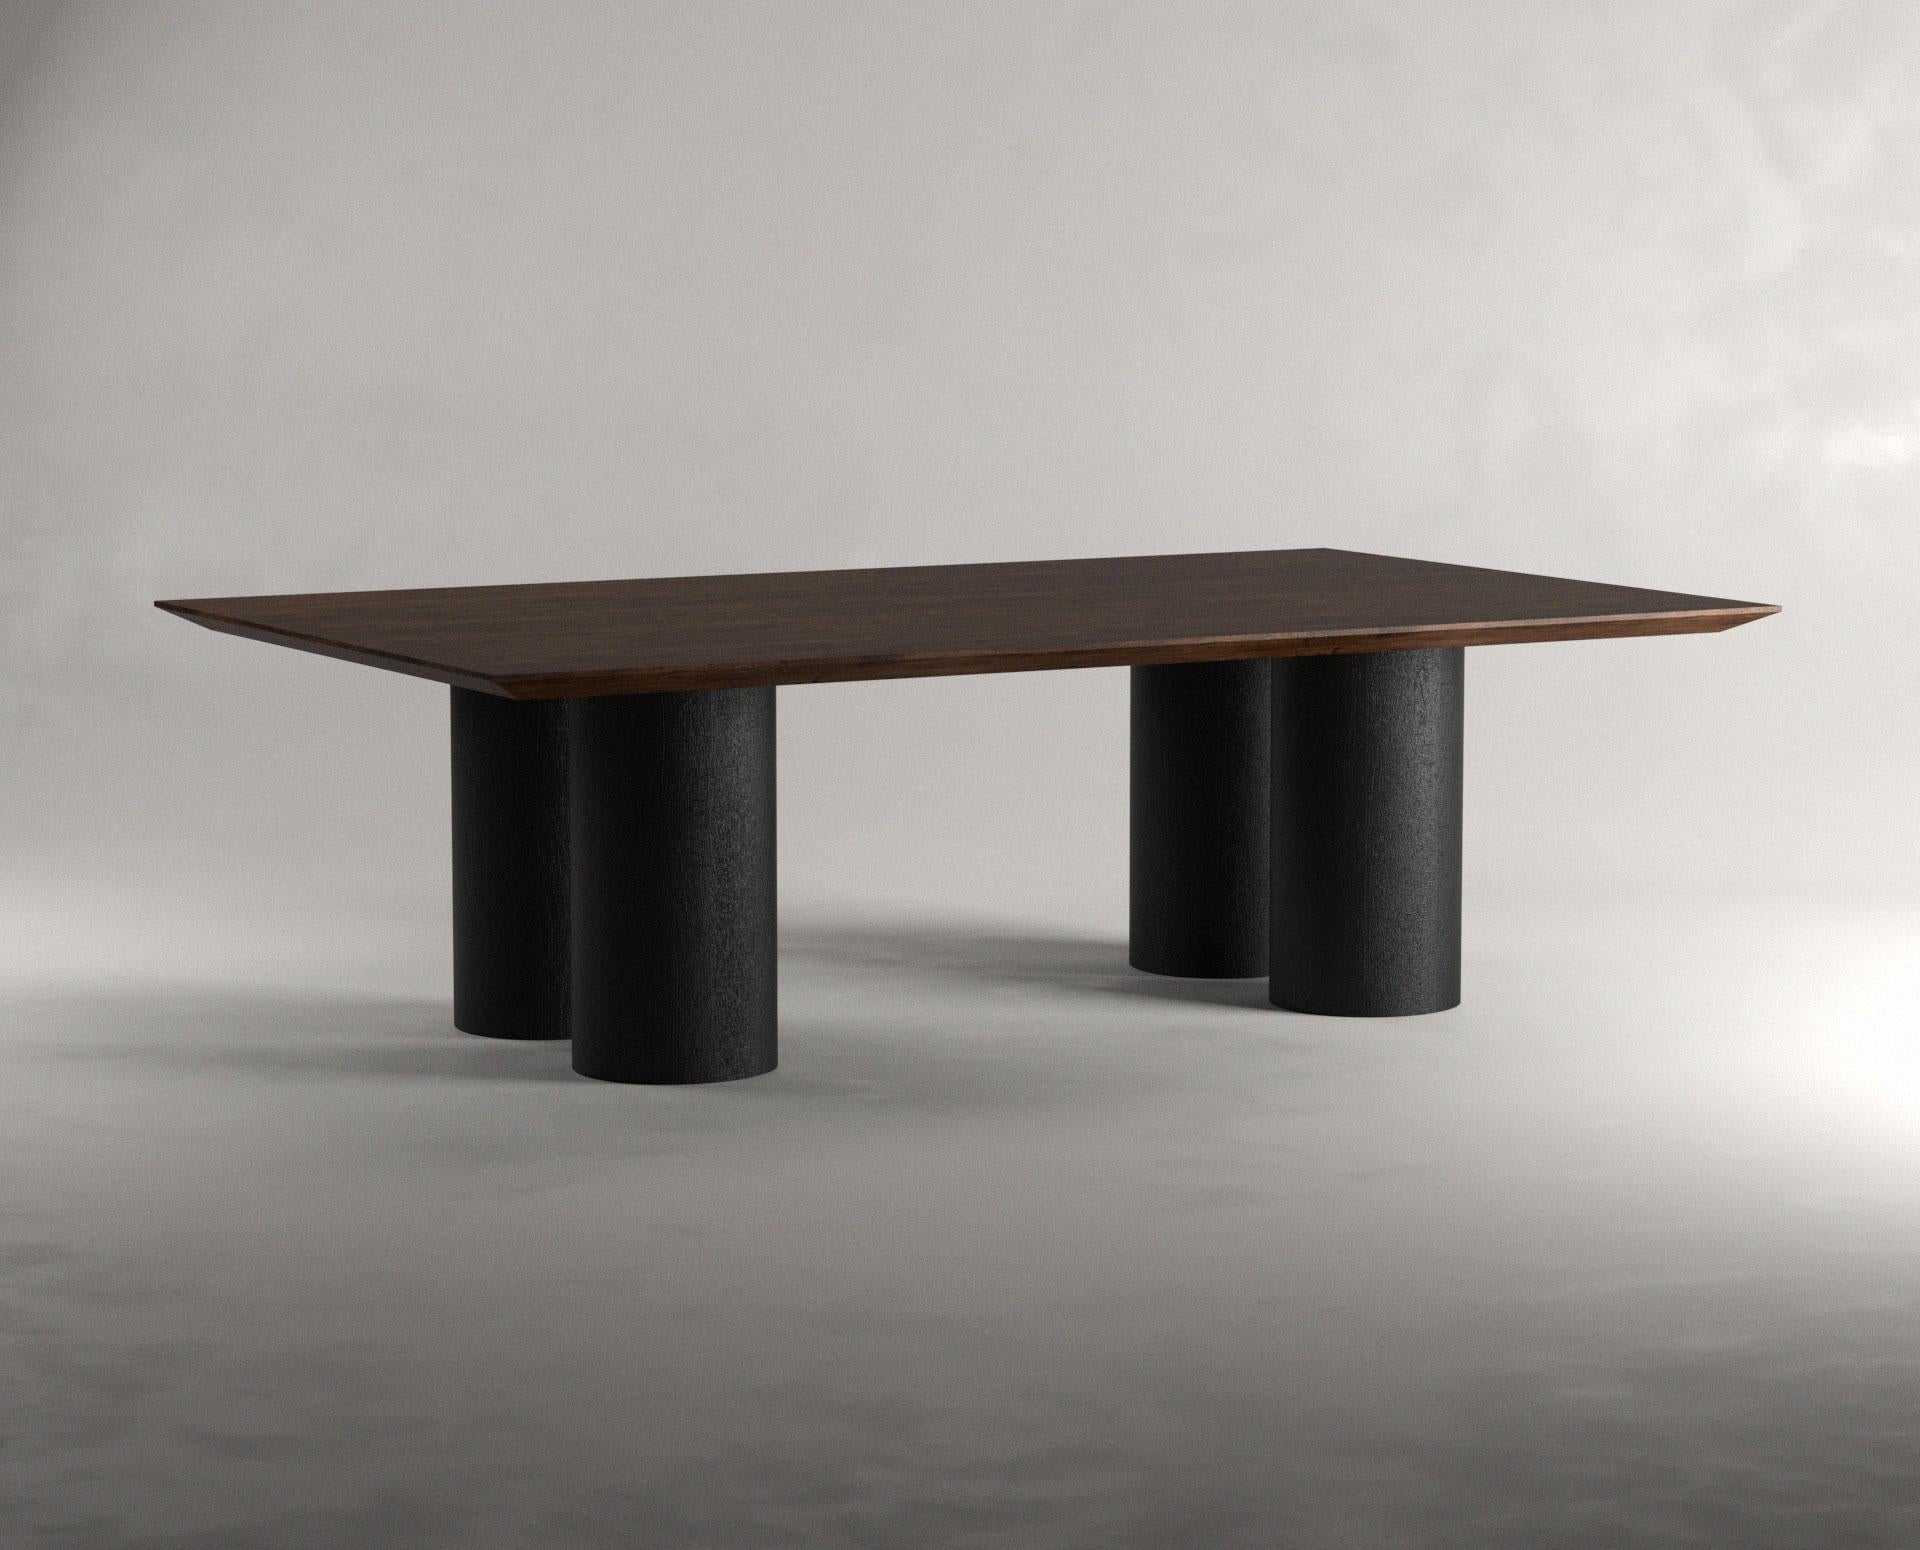 Mexican Pier Square Dining Table by Siete Studio